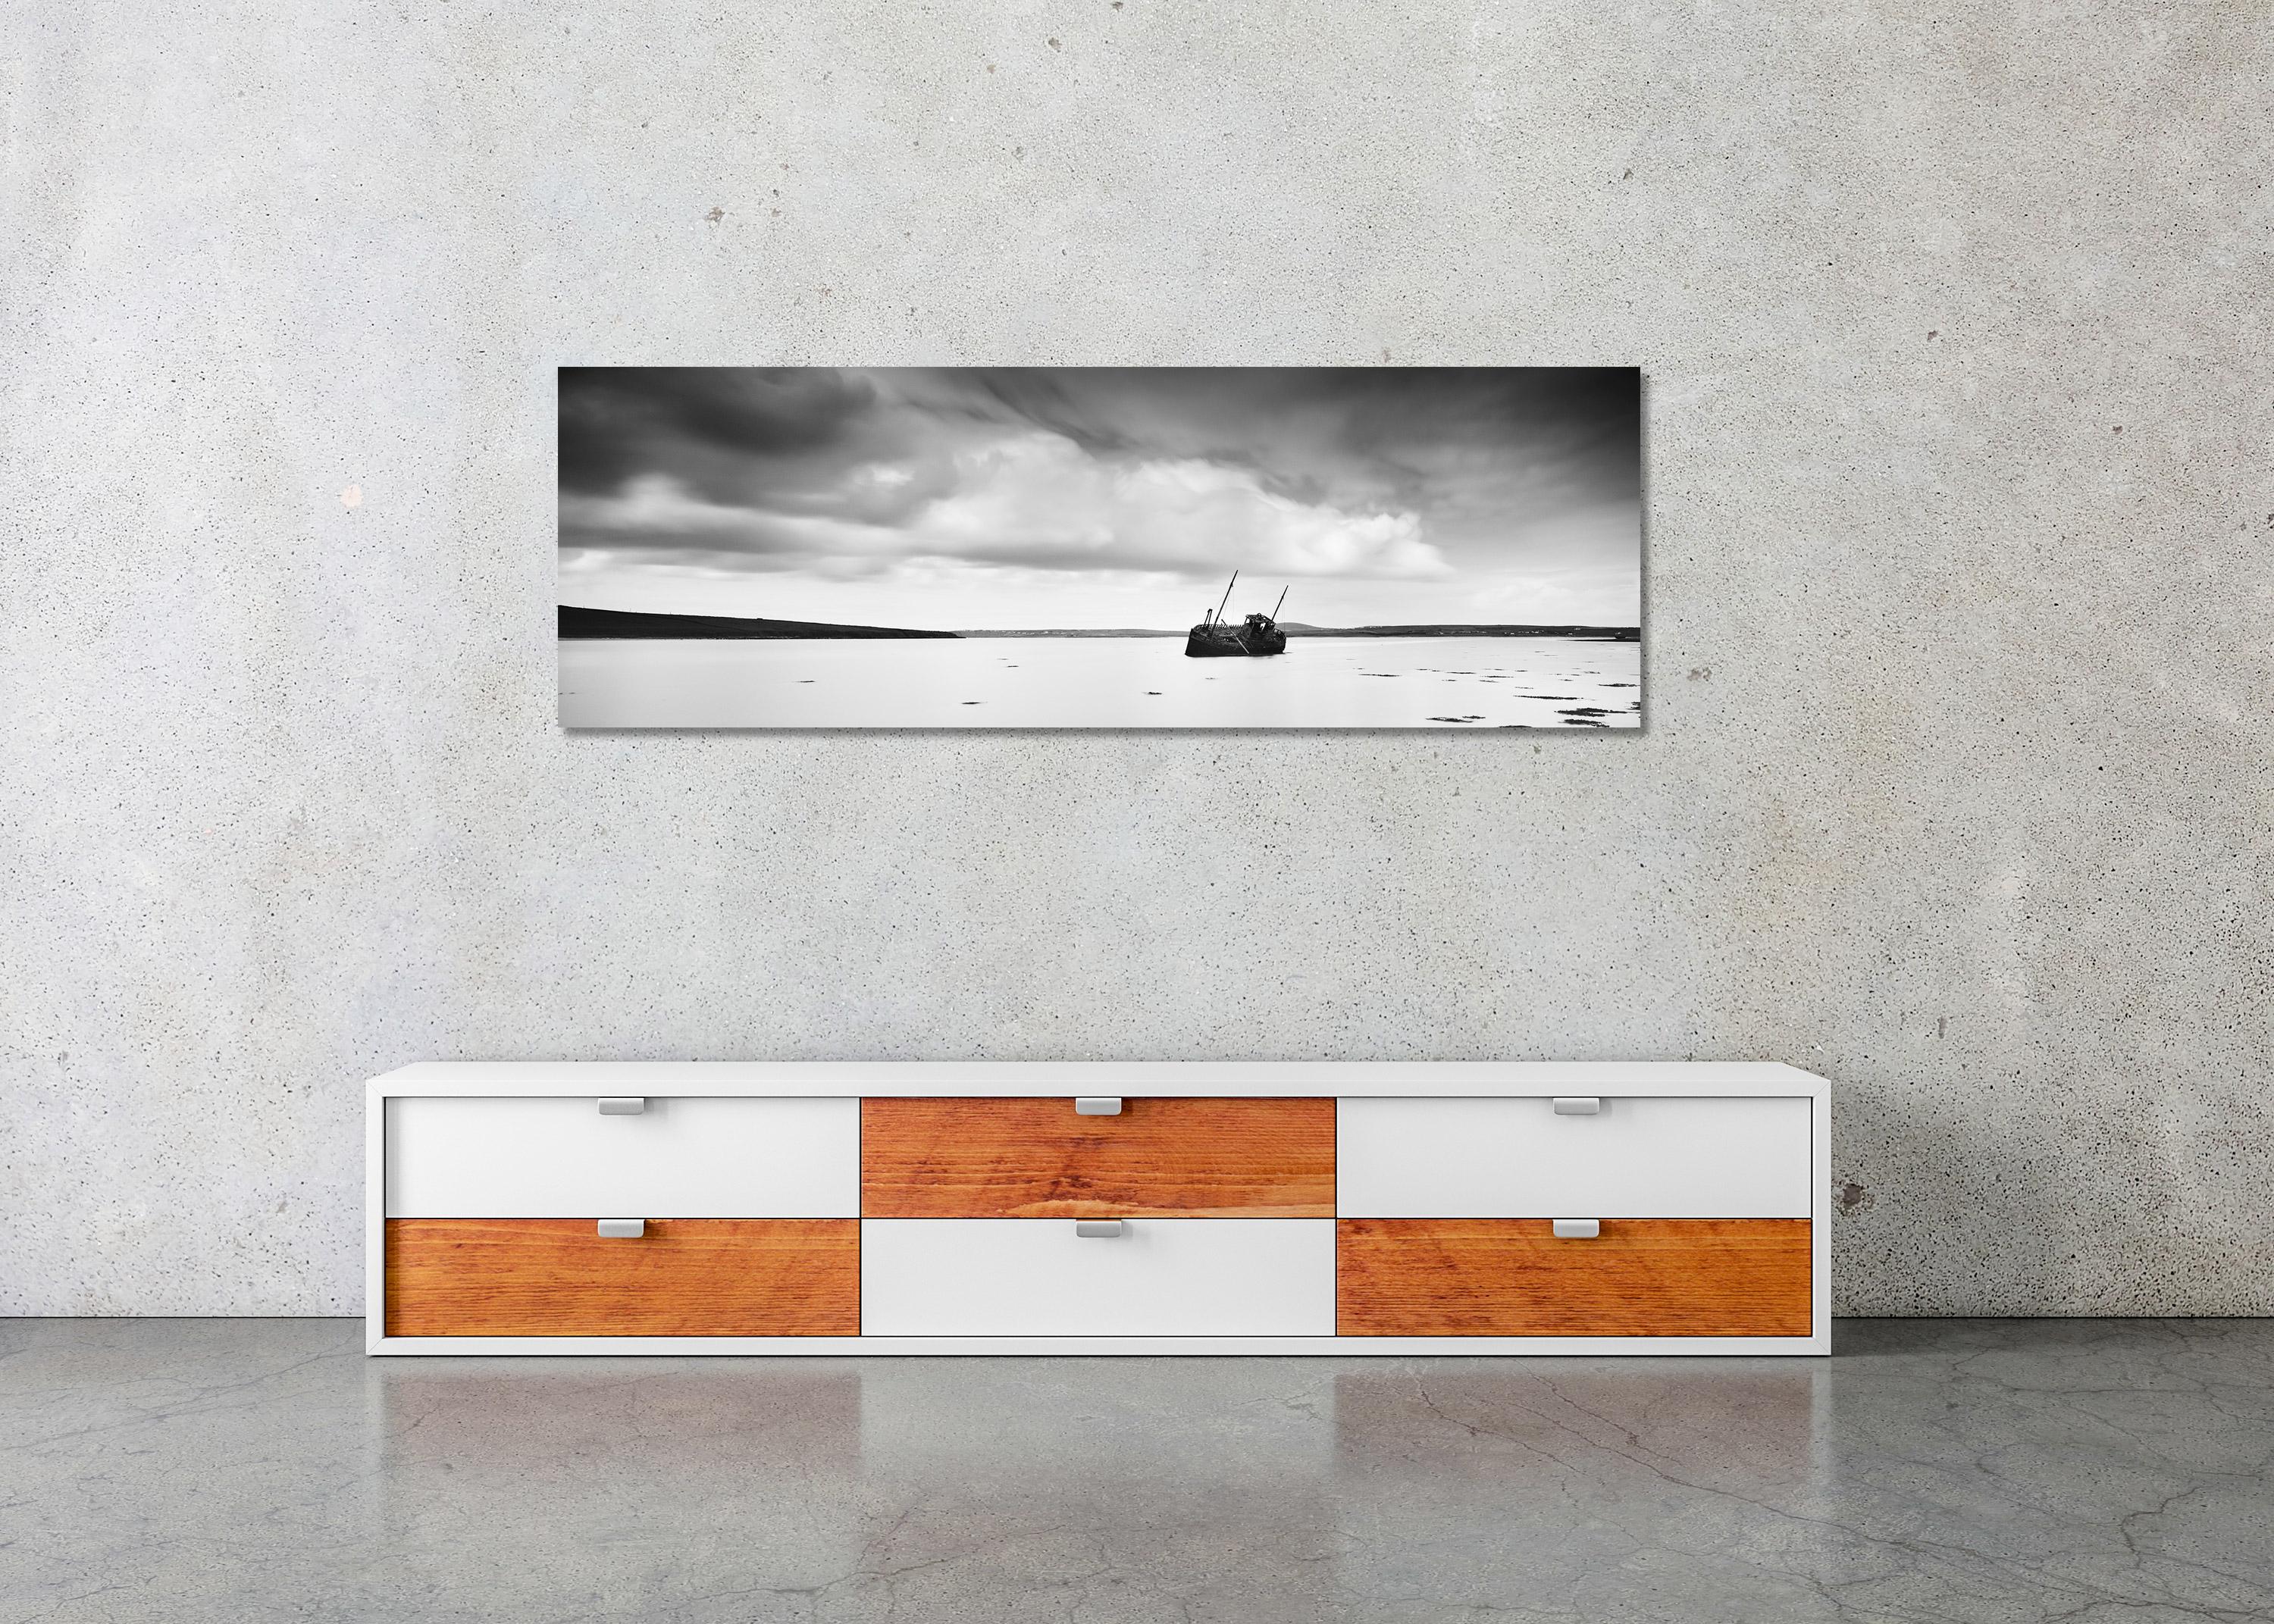 Black and White Fine Art long exposure panorama waterscape photography. Stranded fishing boat in a beautiful bay in, Ireland. Archival pigment ink print, edition of 9. Signed, titled, dated and numbered by artist. Certificate of authenticity